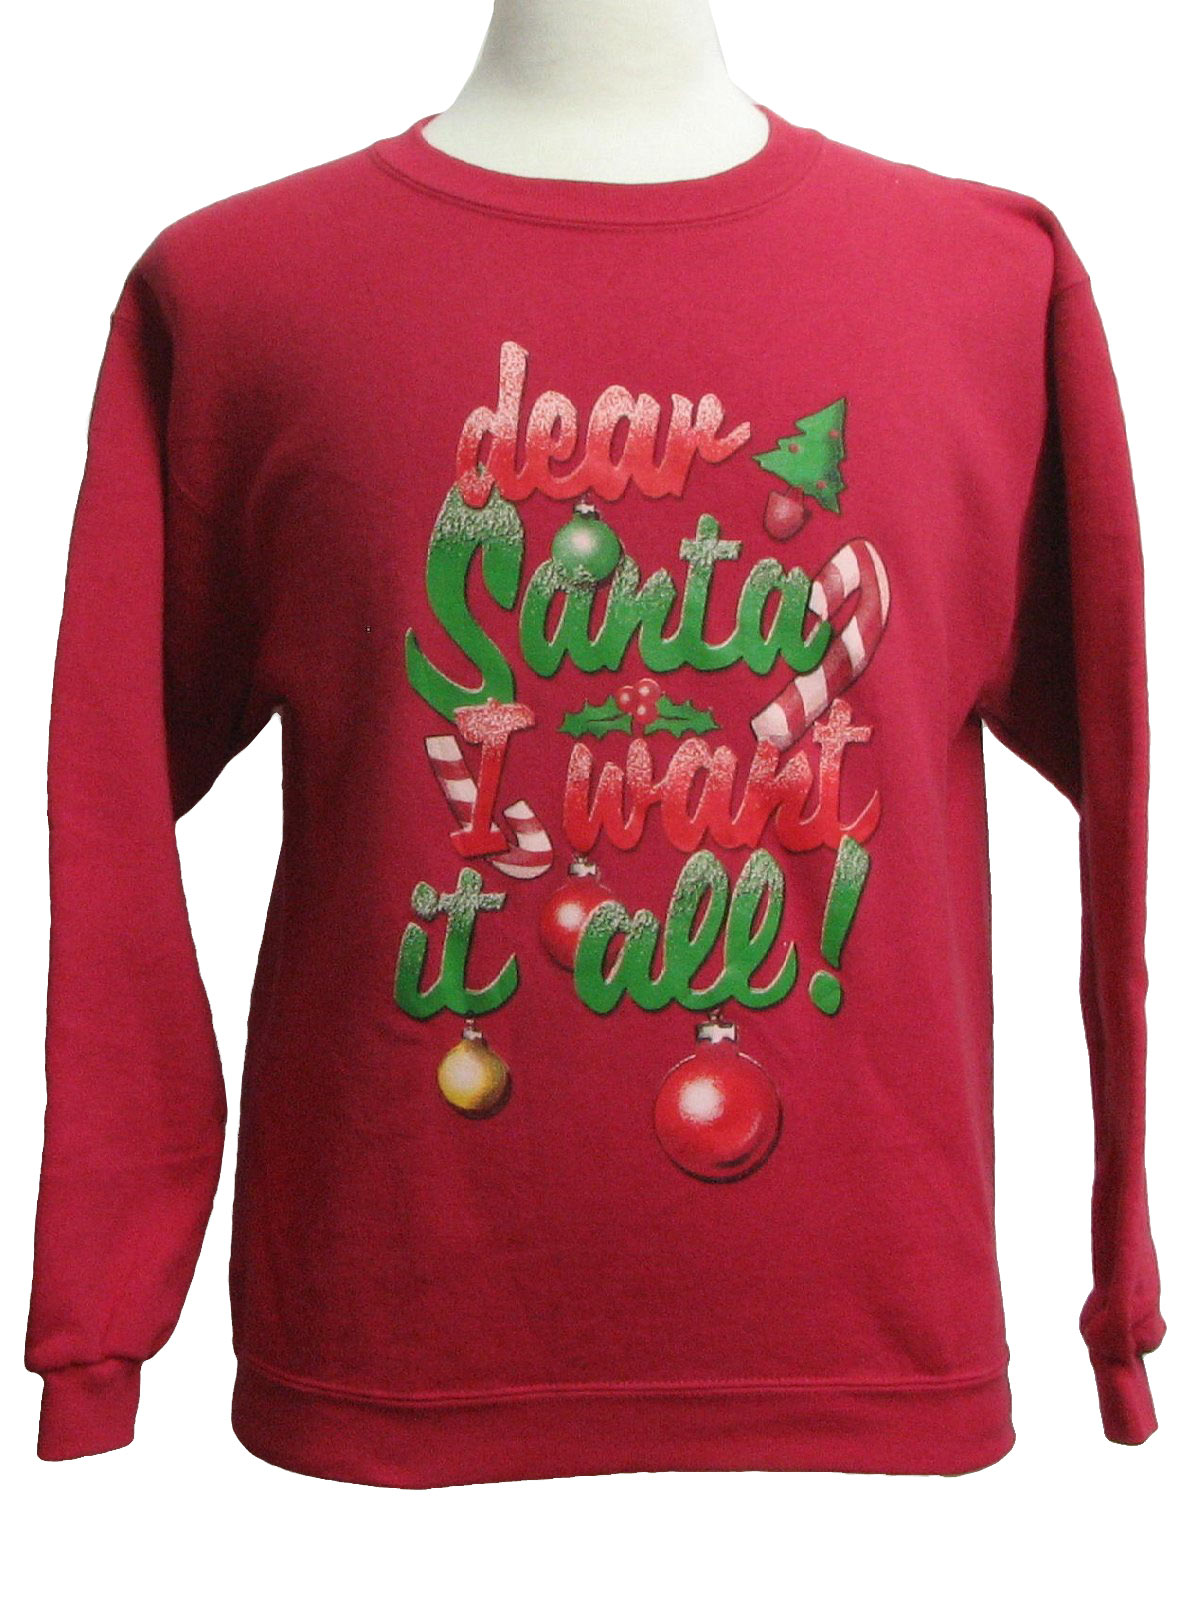 Ugly Christmas Sweatshirt: -Missing Label- Unisex pink, red, green ...